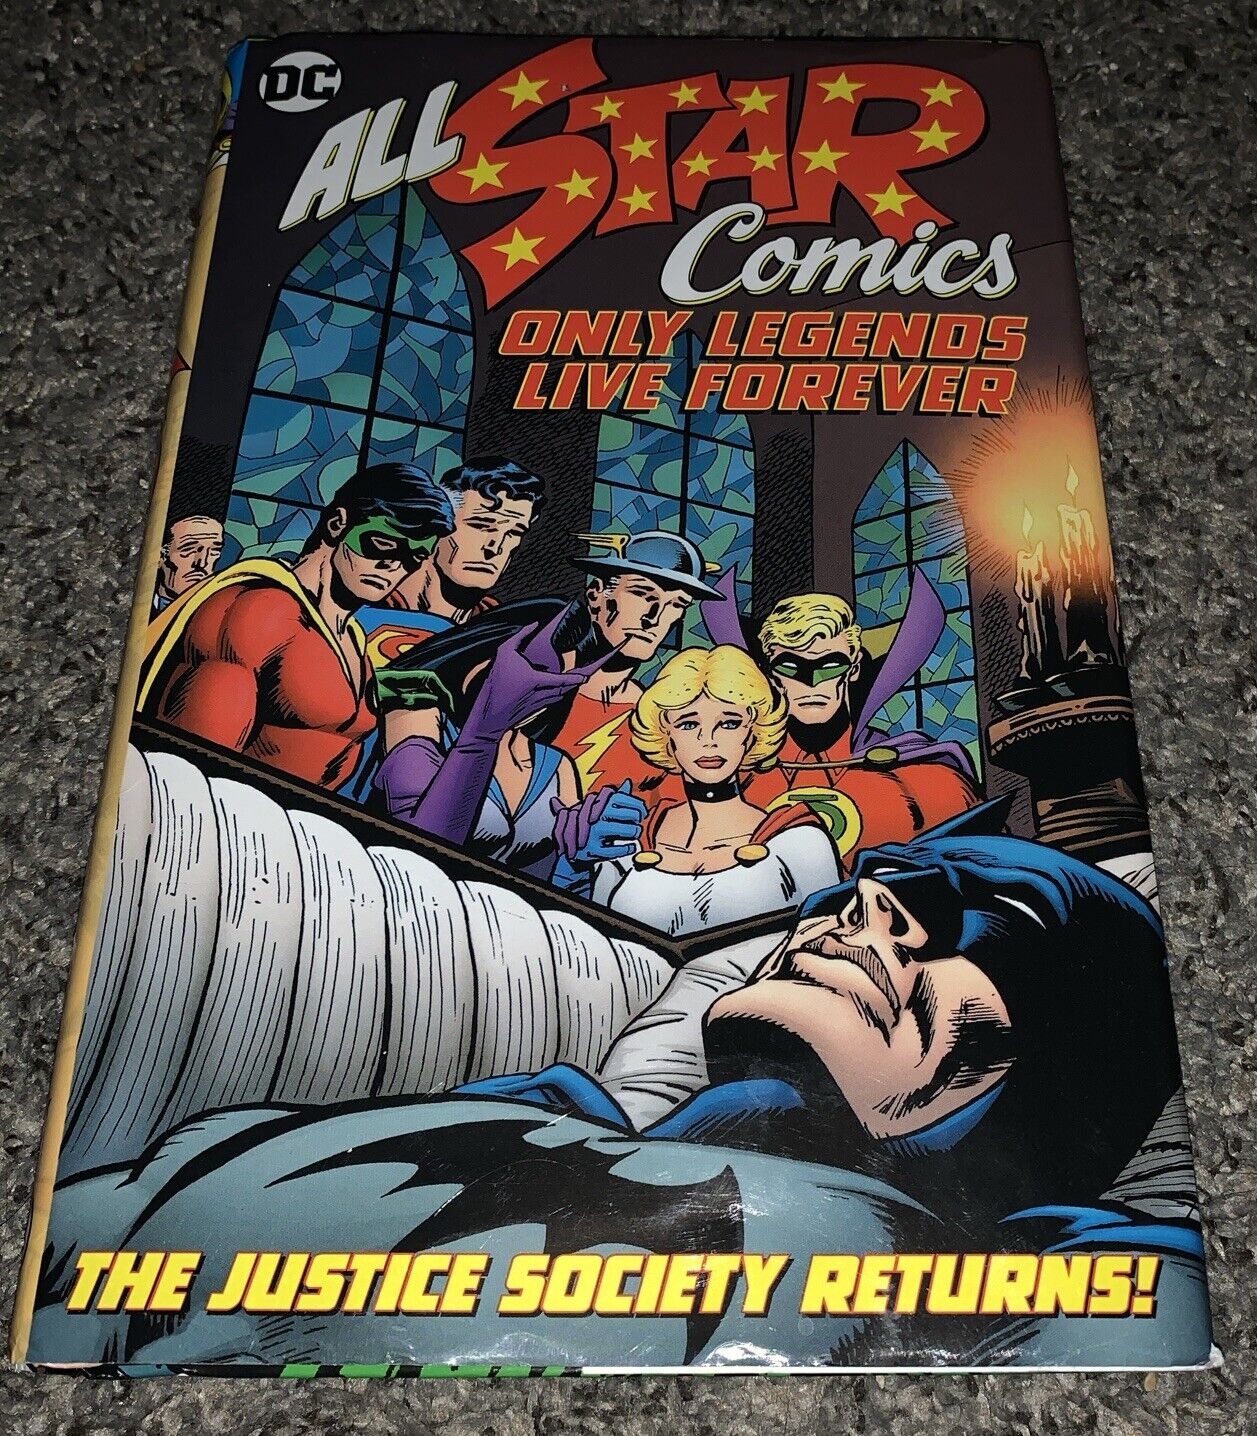 All-Star Comics: Only Legends Live Forever (DC Comics, Hardcover